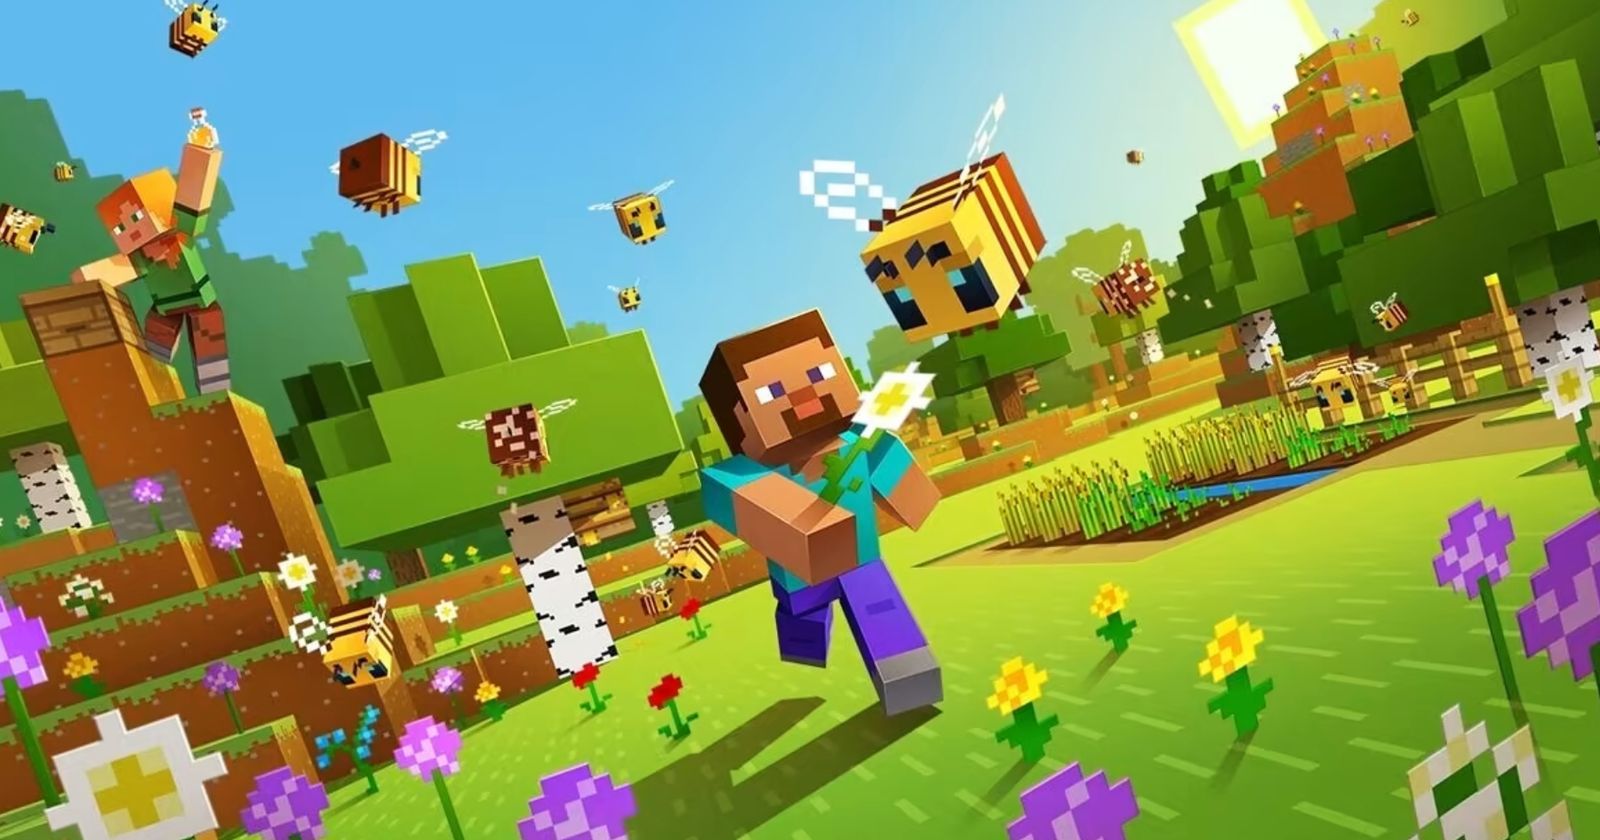 Minecraft Players Can Vote for One of These Three Mobs to Be Added to the  Game